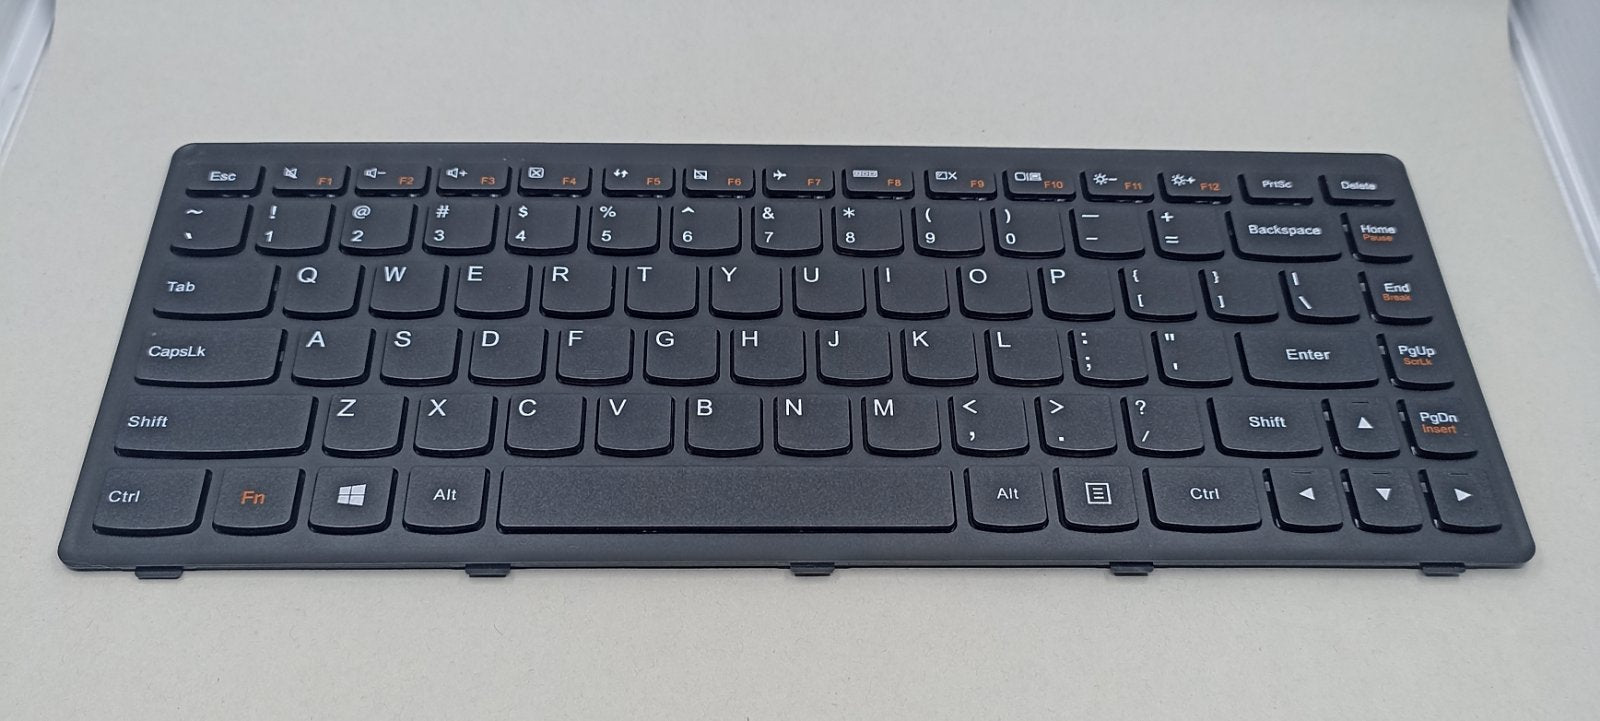 Replacement Keyboard Keys For Lenovo G400S A1